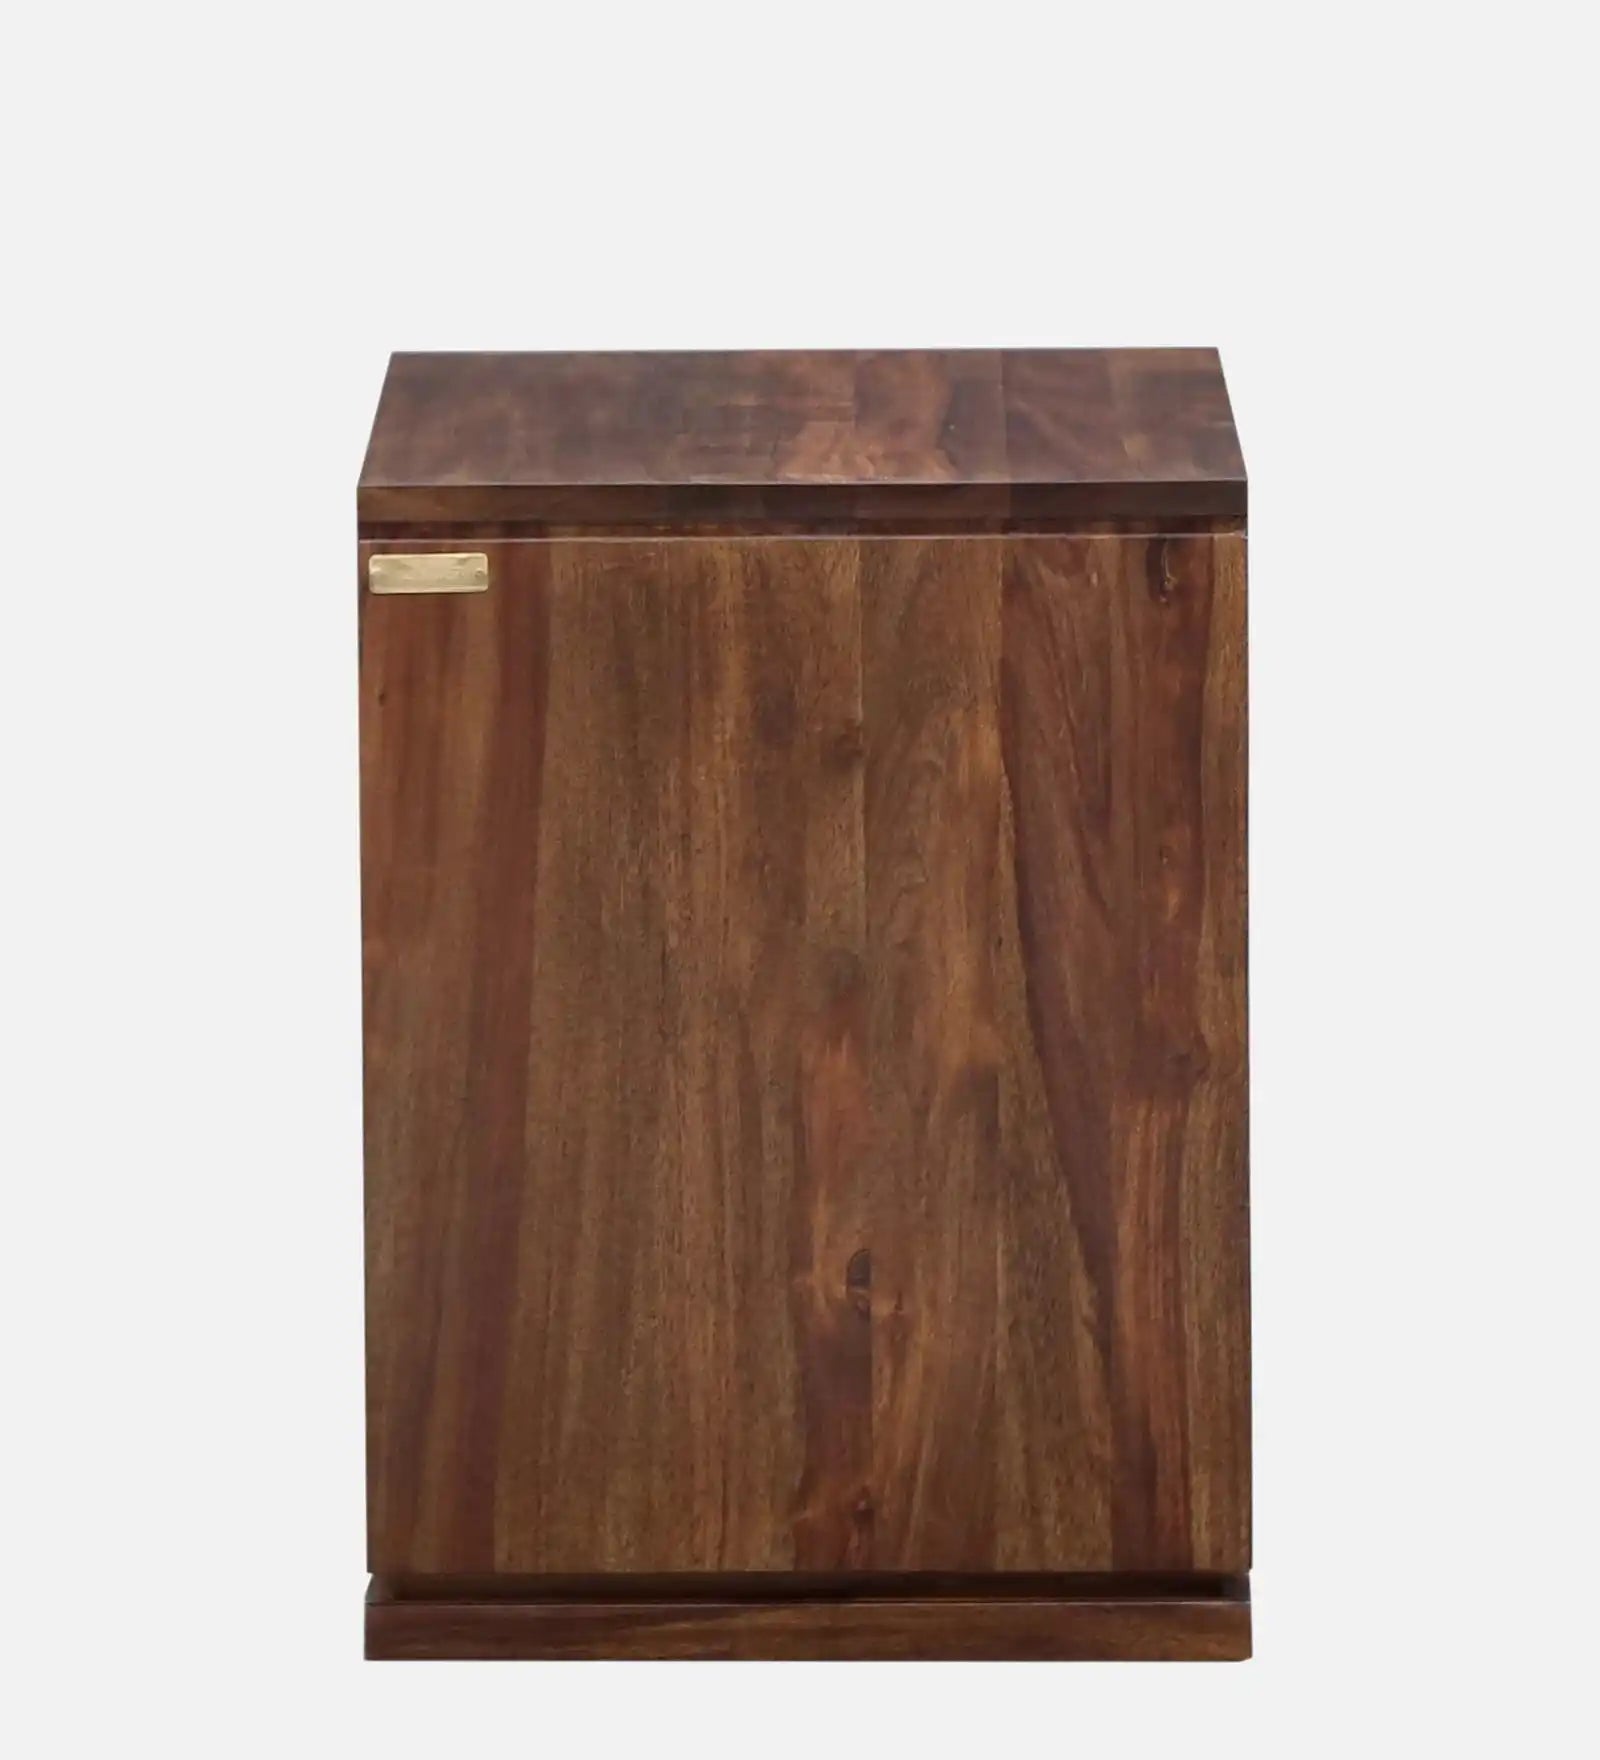 Moscow Nightstand Bedside Table in Natural Wood